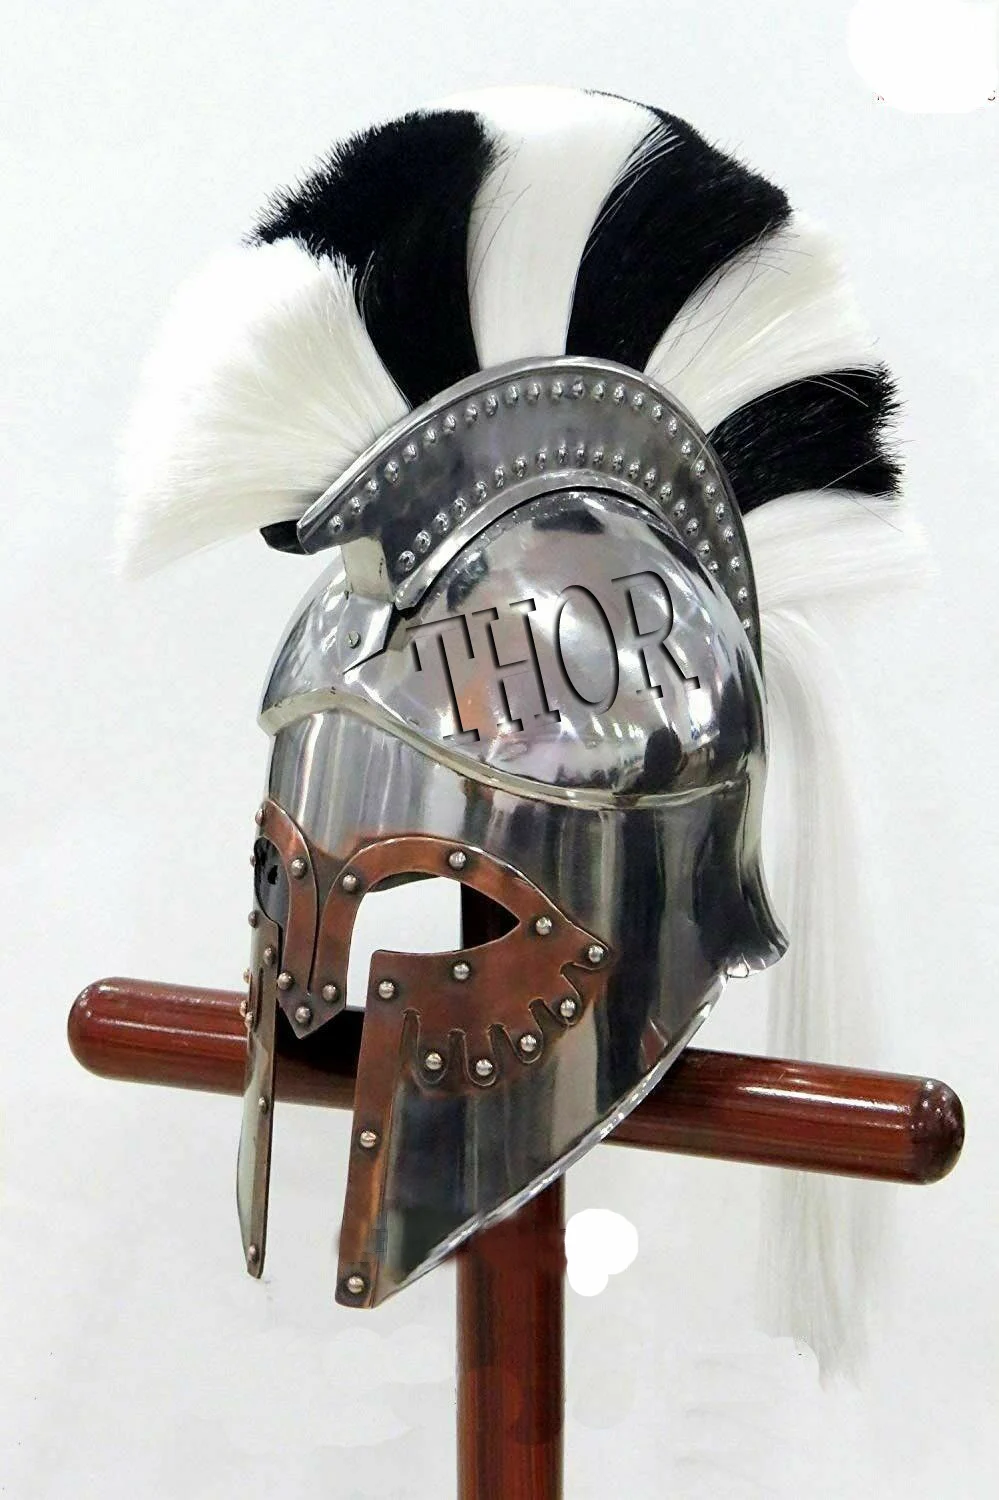 Details about   Roman Armor Helmet With BLACK & BROWN Plume Medieval Knight Crusader Spartan 